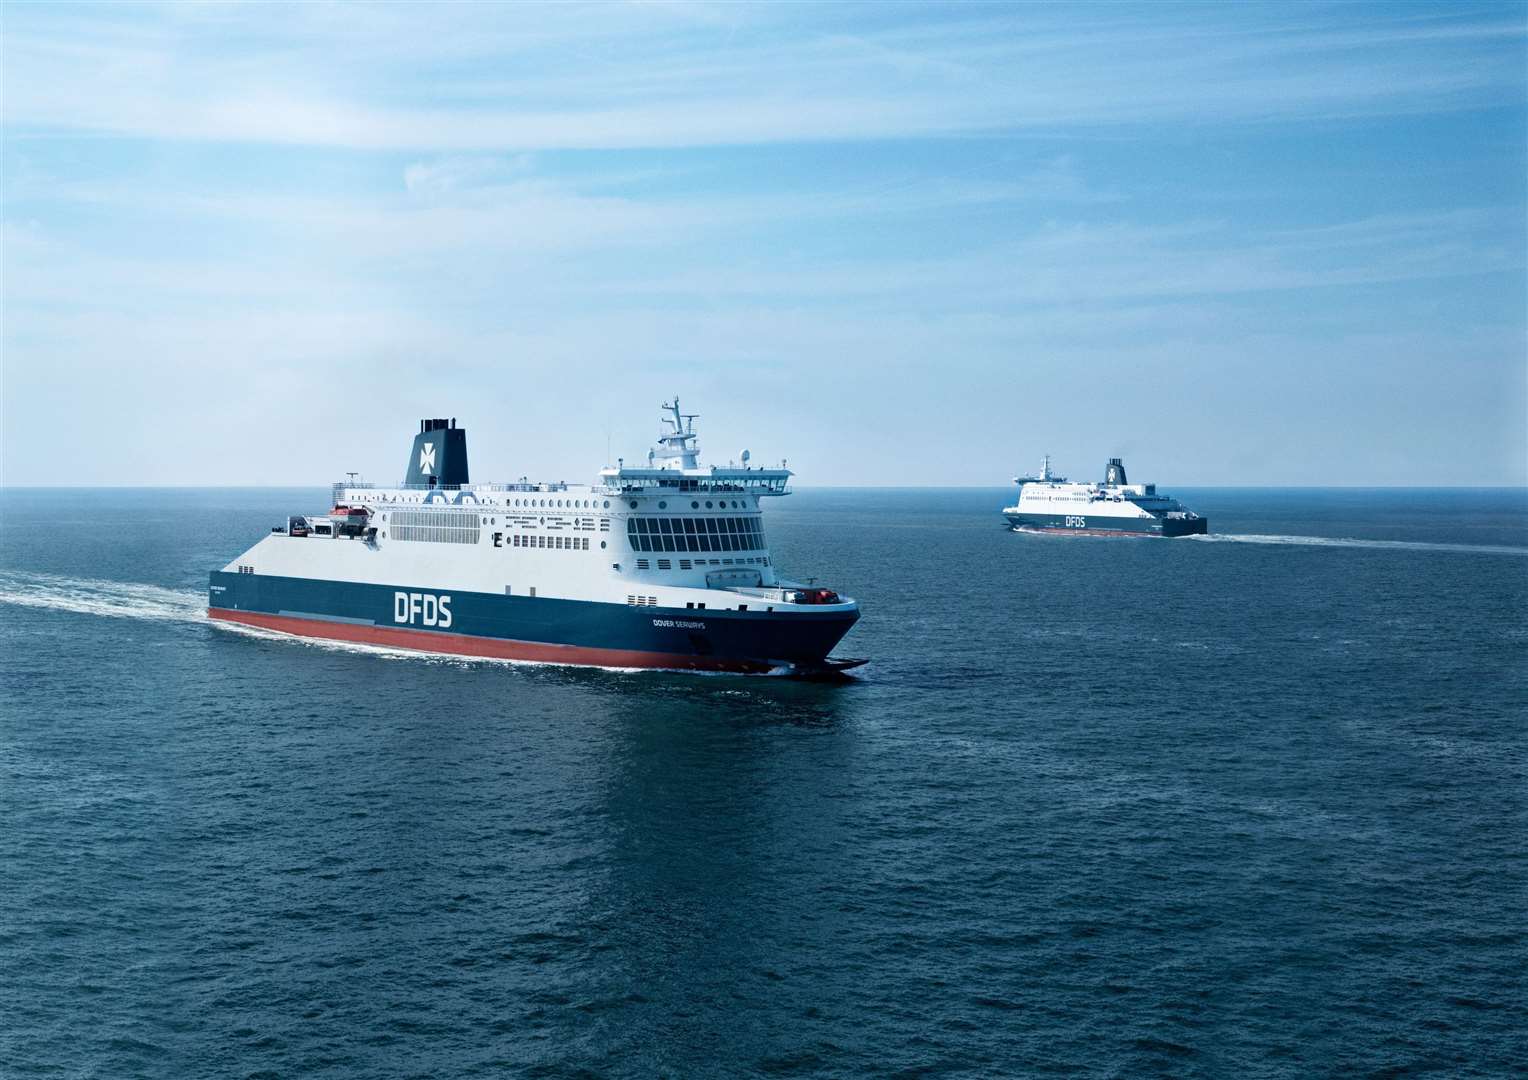 DFDS saw its bottom line hit - but sails on